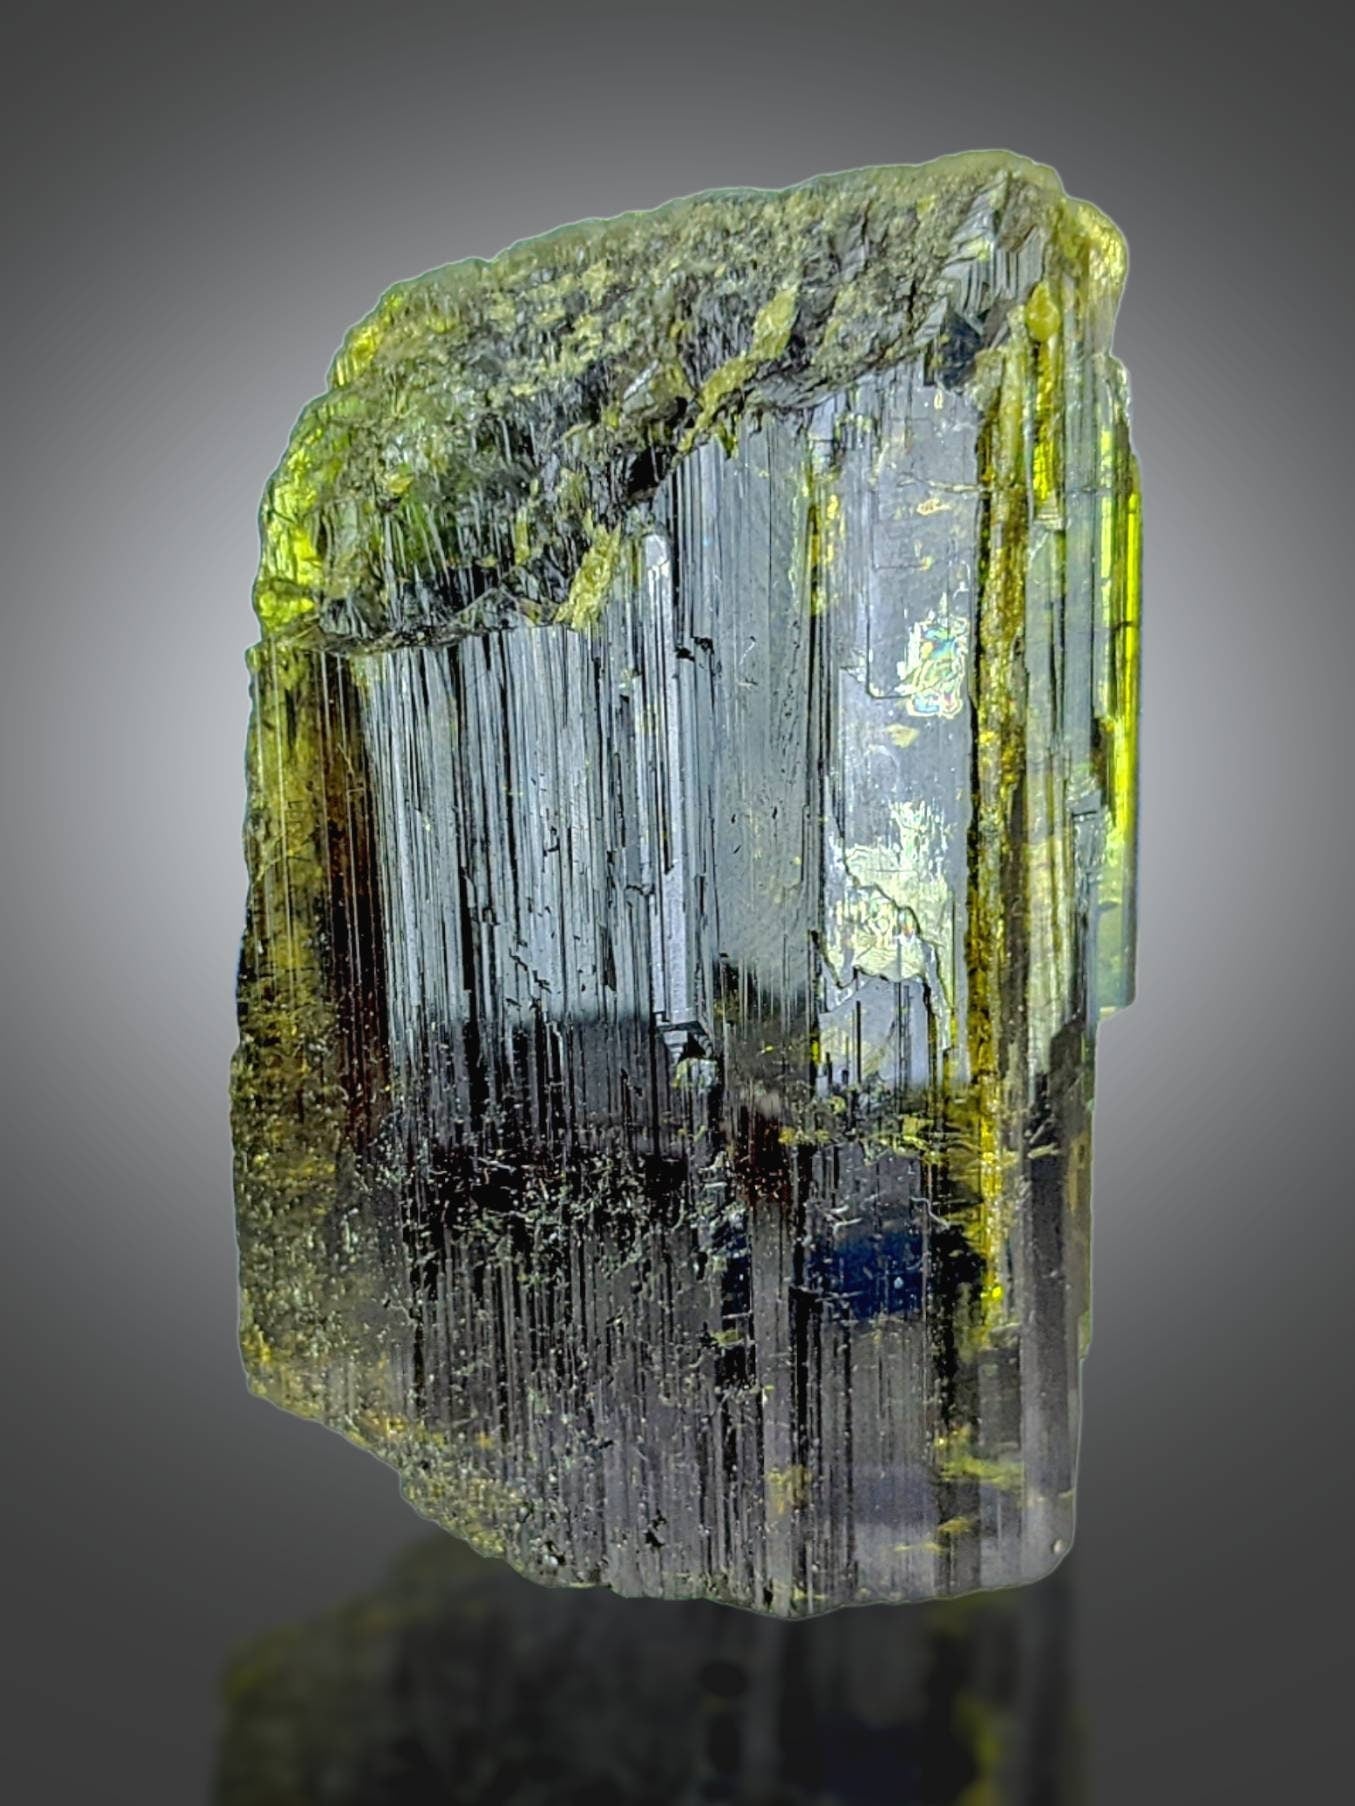 ARSAA GEMS AND MINERALSNatural transparent aesthetic 54 grams Beautiful pleochroic green epidote crystal from Pakistan - Premium  from ARSAA GEMS AND MINERALS - Just $50.00! Shop now at ARSAA GEMS AND MINERALS